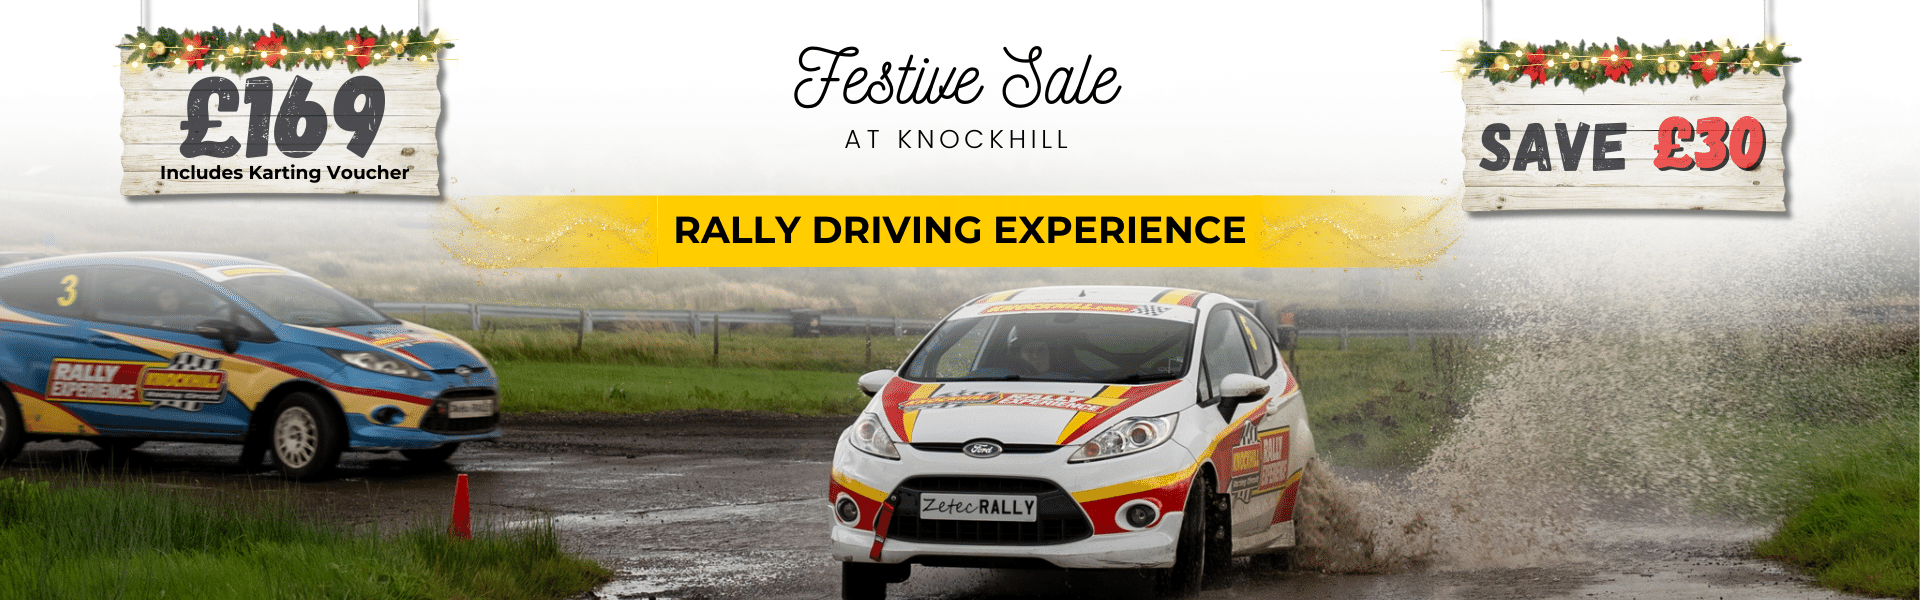 Knockhill Rally Experience